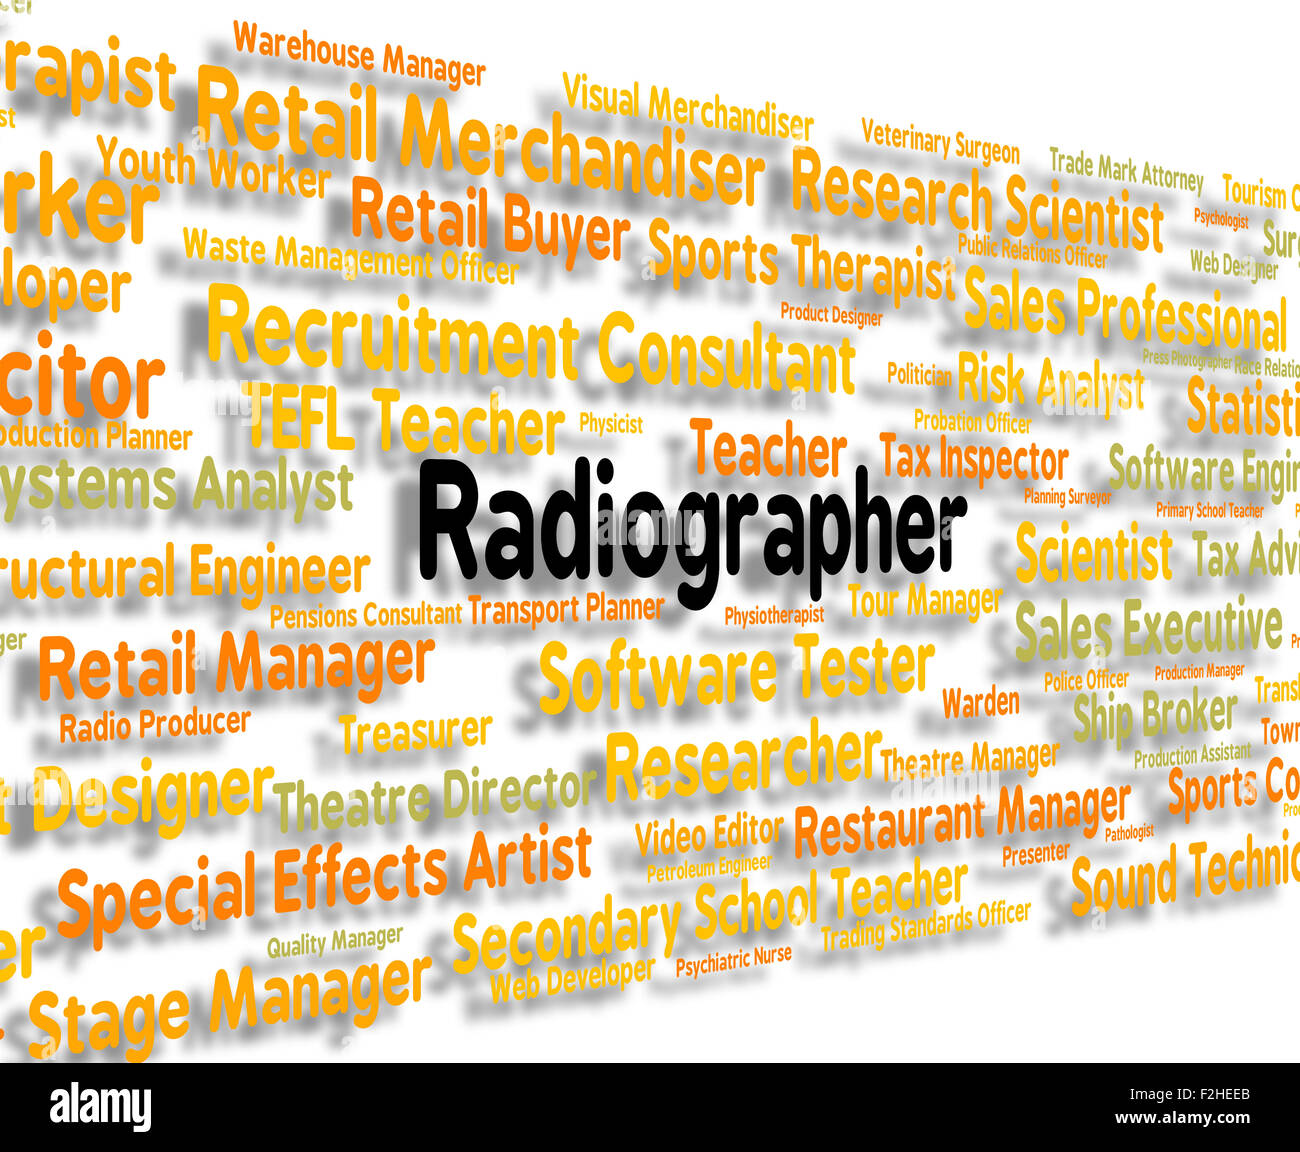 Radiographer Job Showing Occupations Jobs And Employee Stock Photo